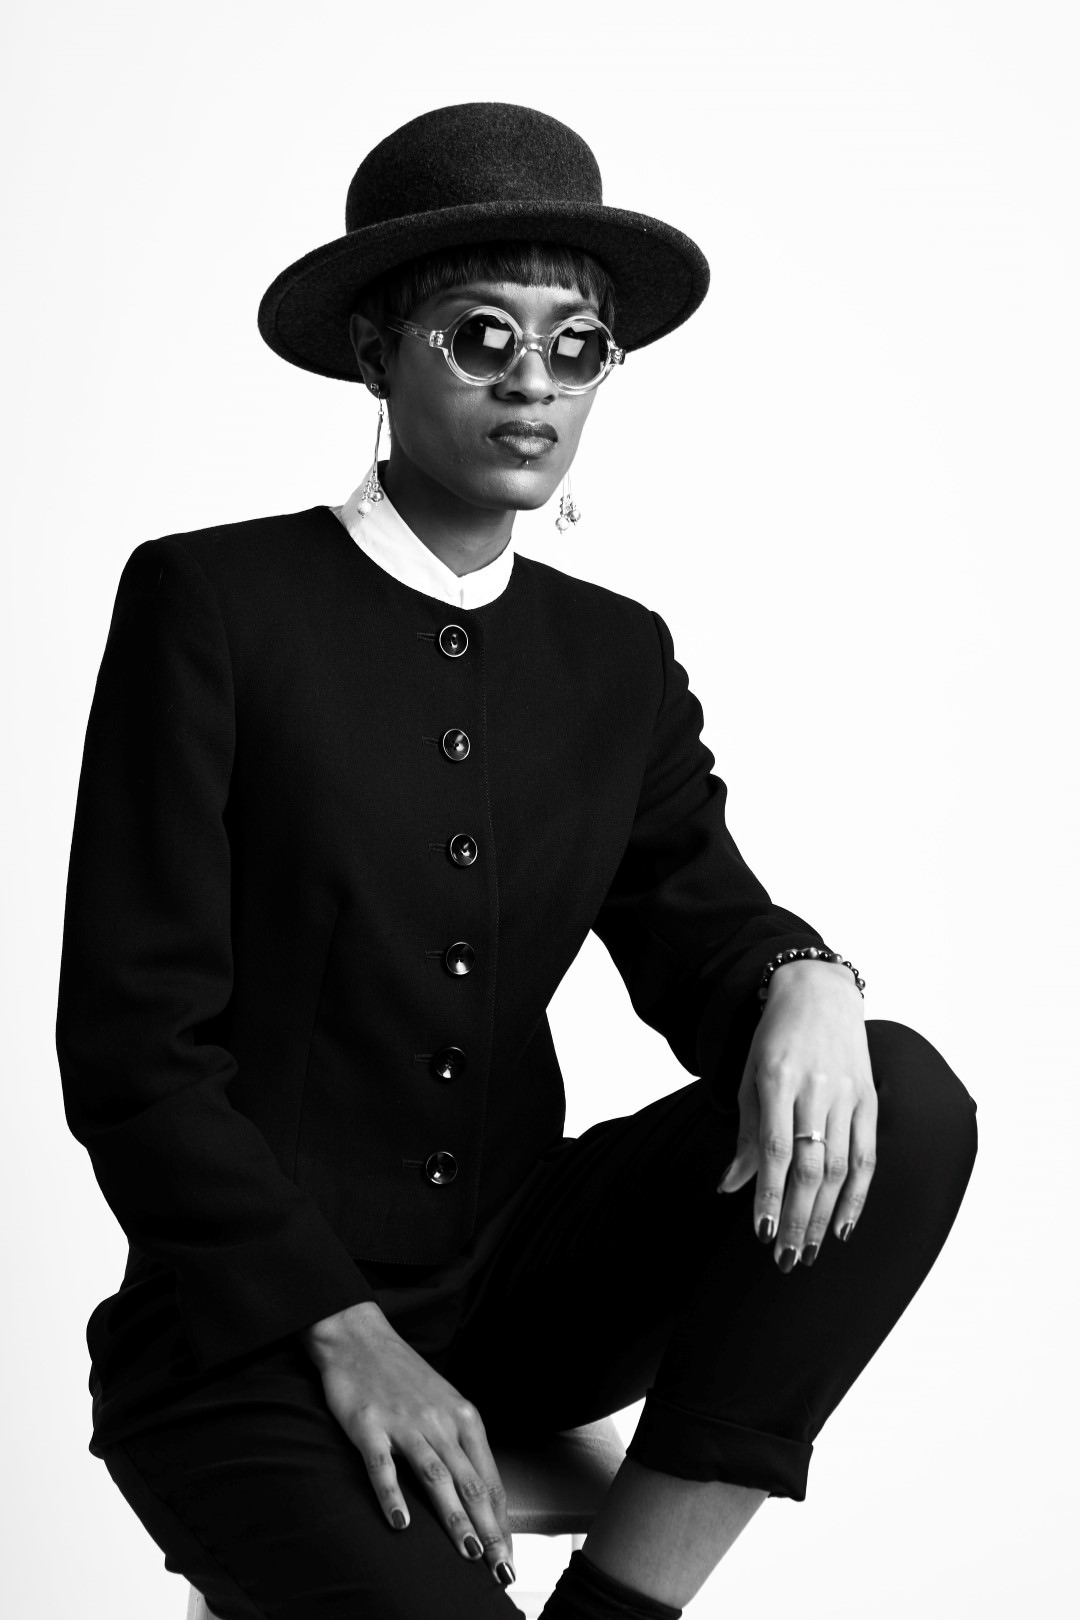 Donya Patrice from the style siblings posing in a suit and hat